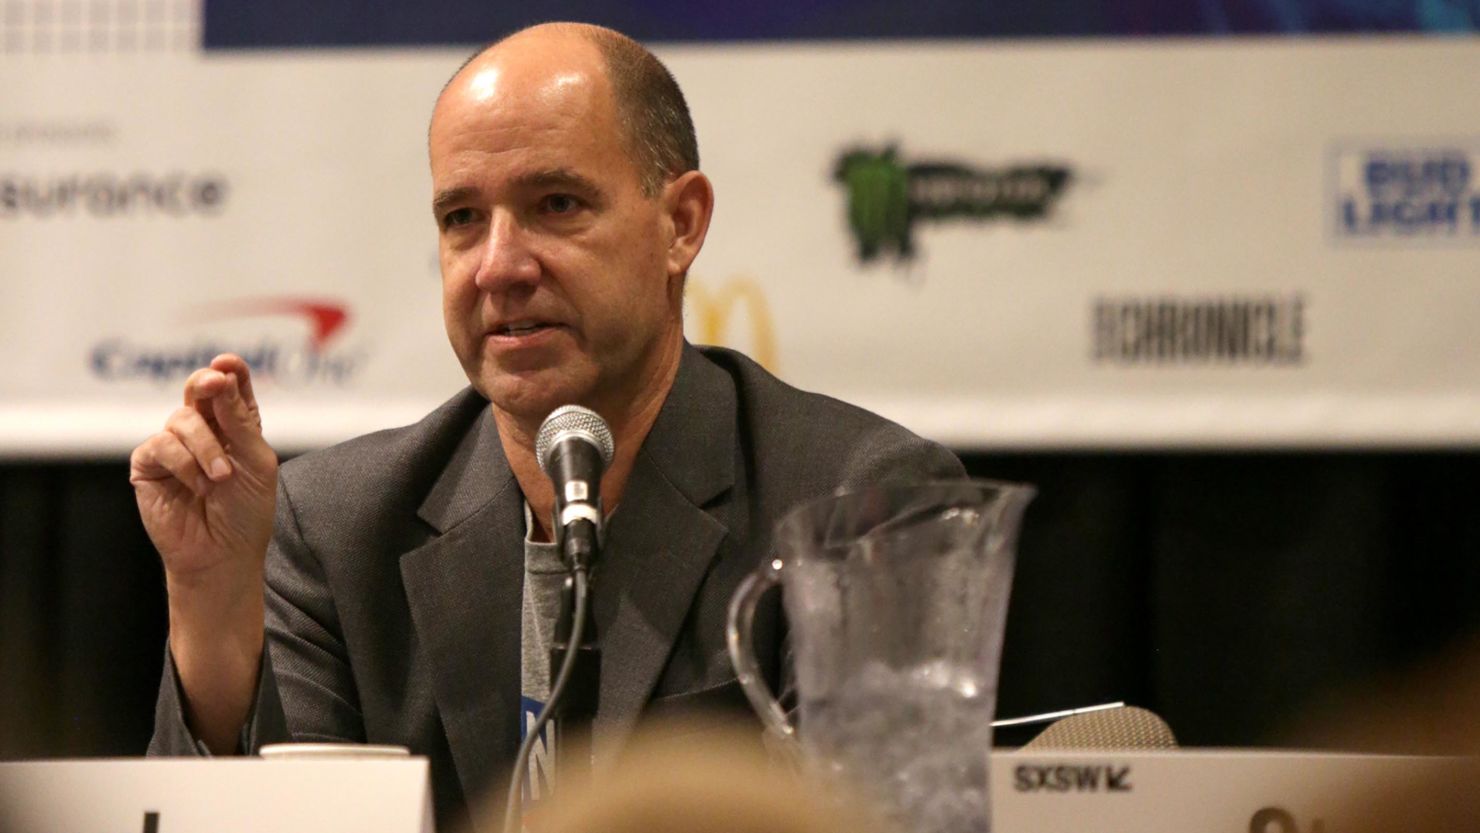 Chief Political Analyst of ABC News Matthew Dowd speaks onstage at 'The War at Home: Trump and the Mainstream Media' during 2017 SXSW Conference and Festivals at JW Marriott on March 16, 2017 in Austin, Texas.  